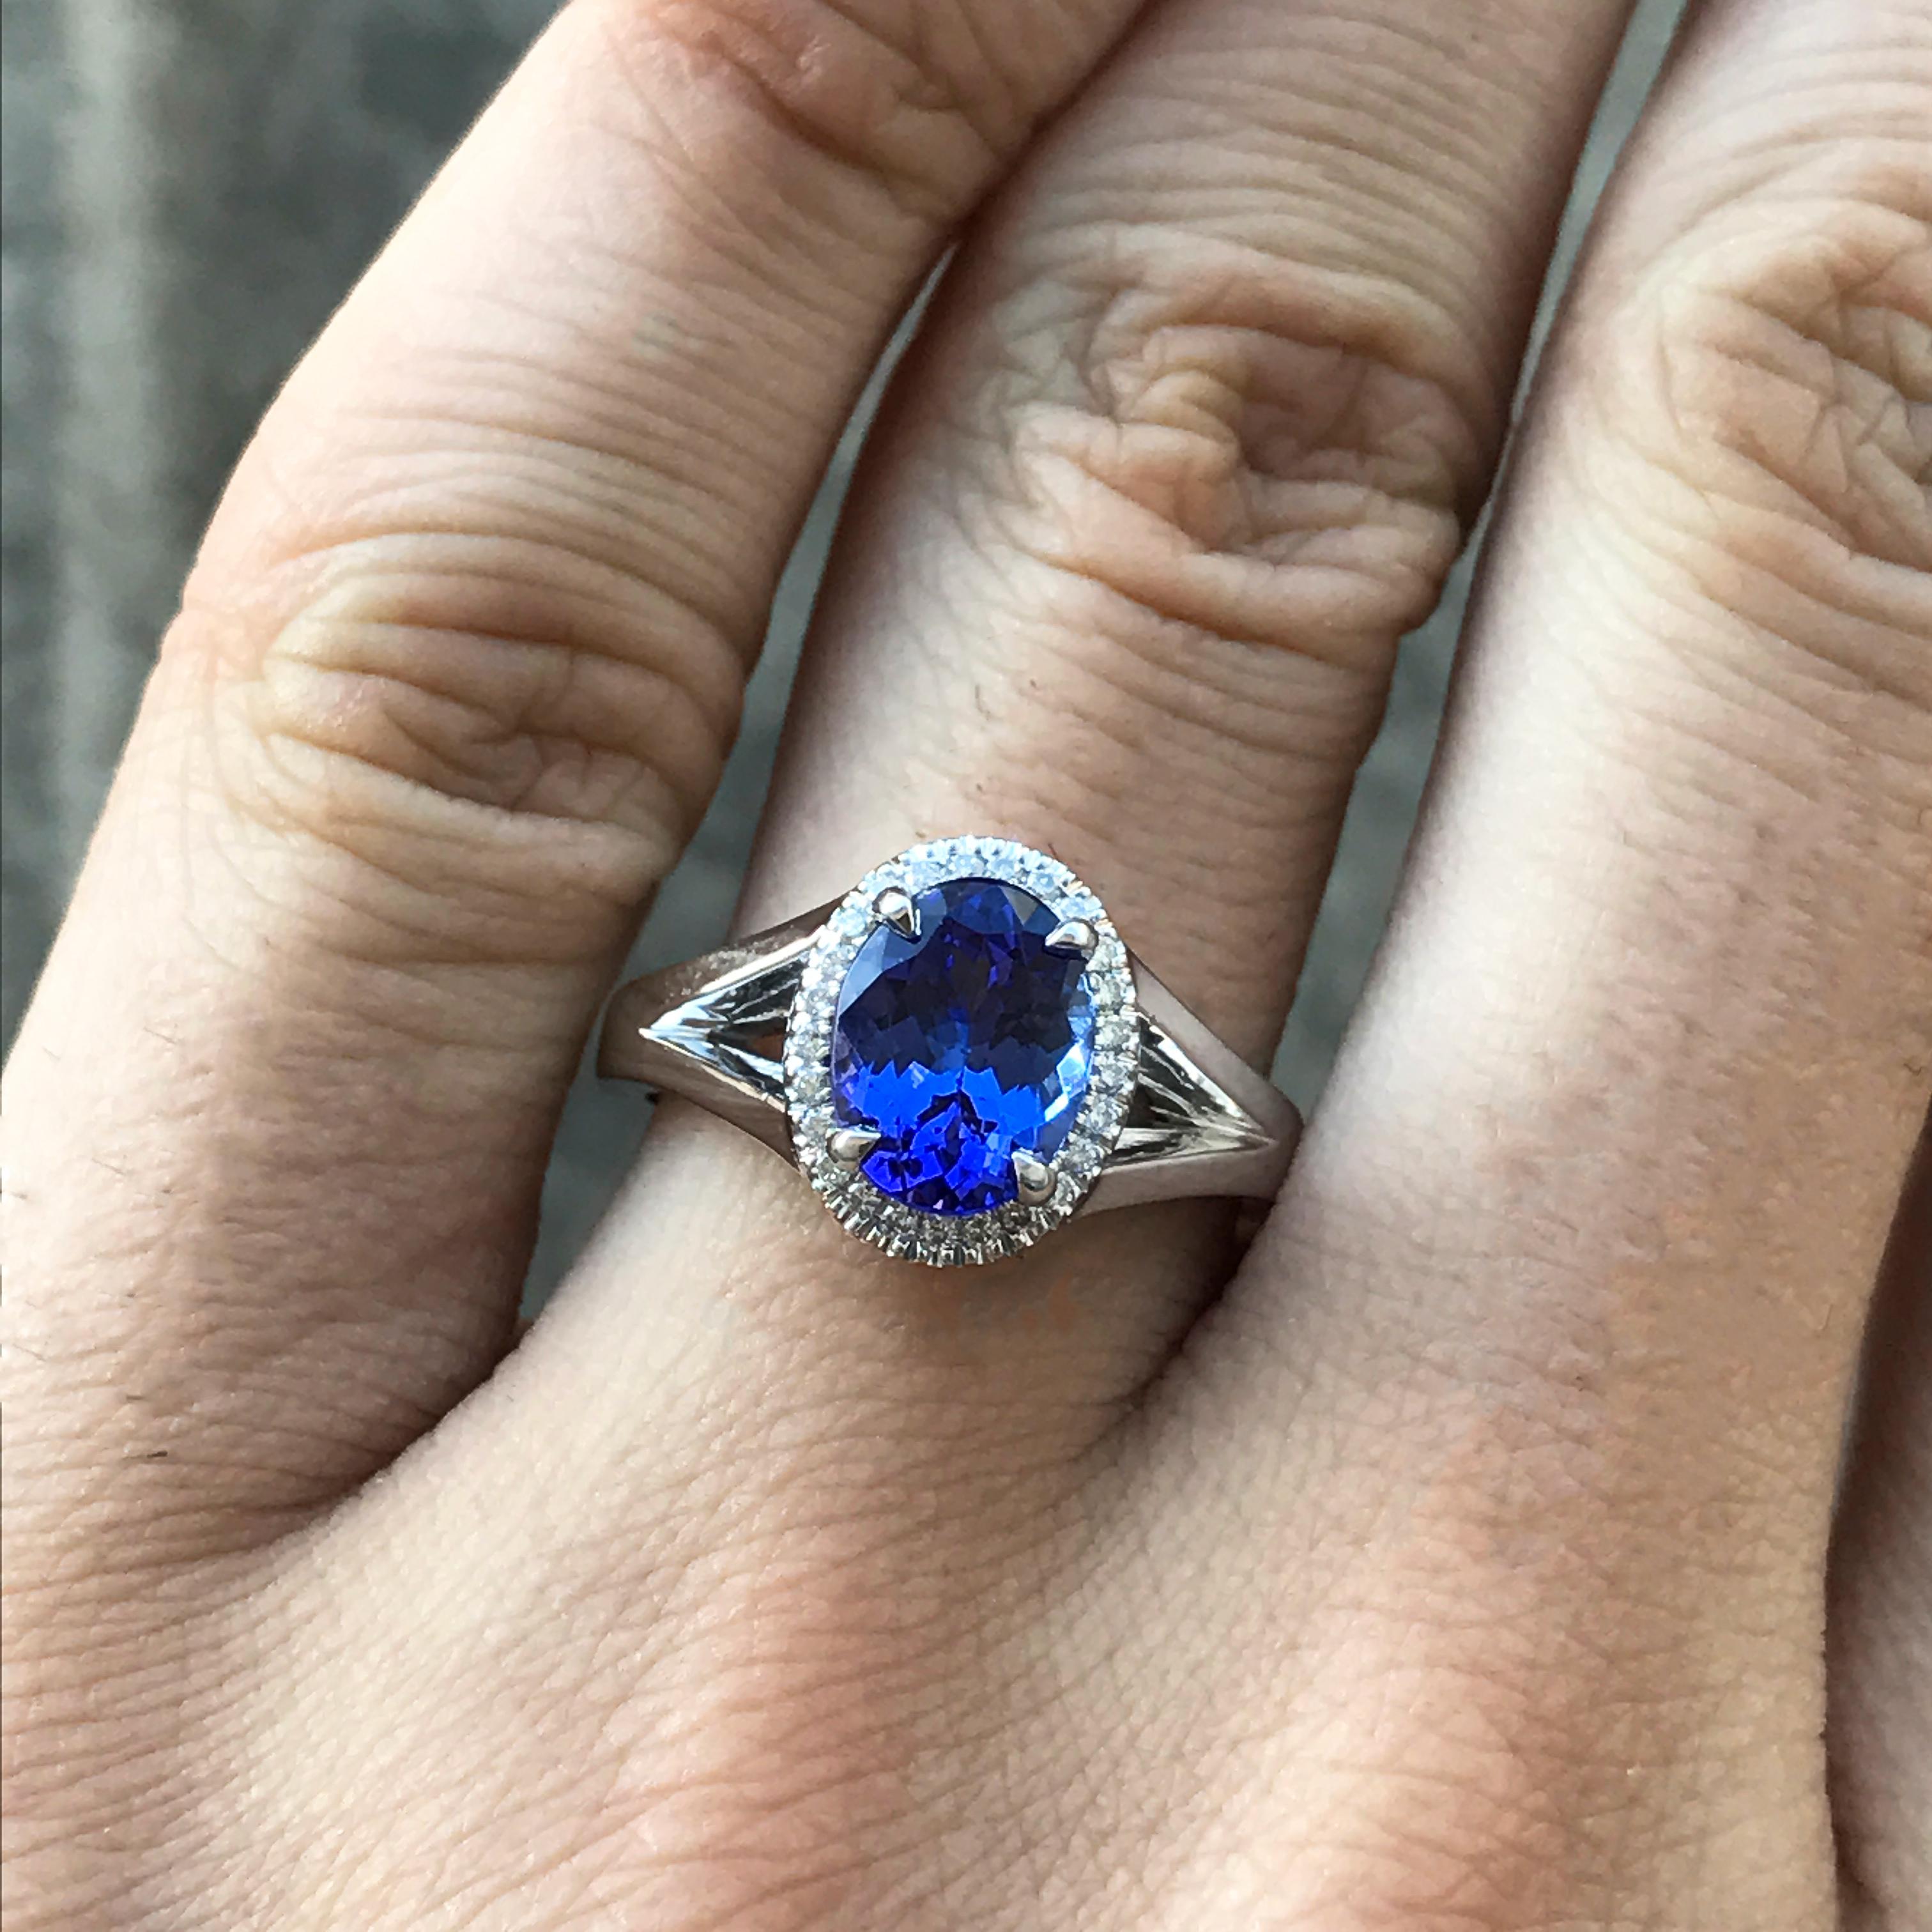 Ring will be made to order for your finger size, please allow 3-6 weeks.

Stunning 2.00 Carat  Oval Tanzanite set in a hand designed 18k White Gold.
The stone is enhanced three round diamonds on each side.

AS015 - 2000071

Center Stone Details: